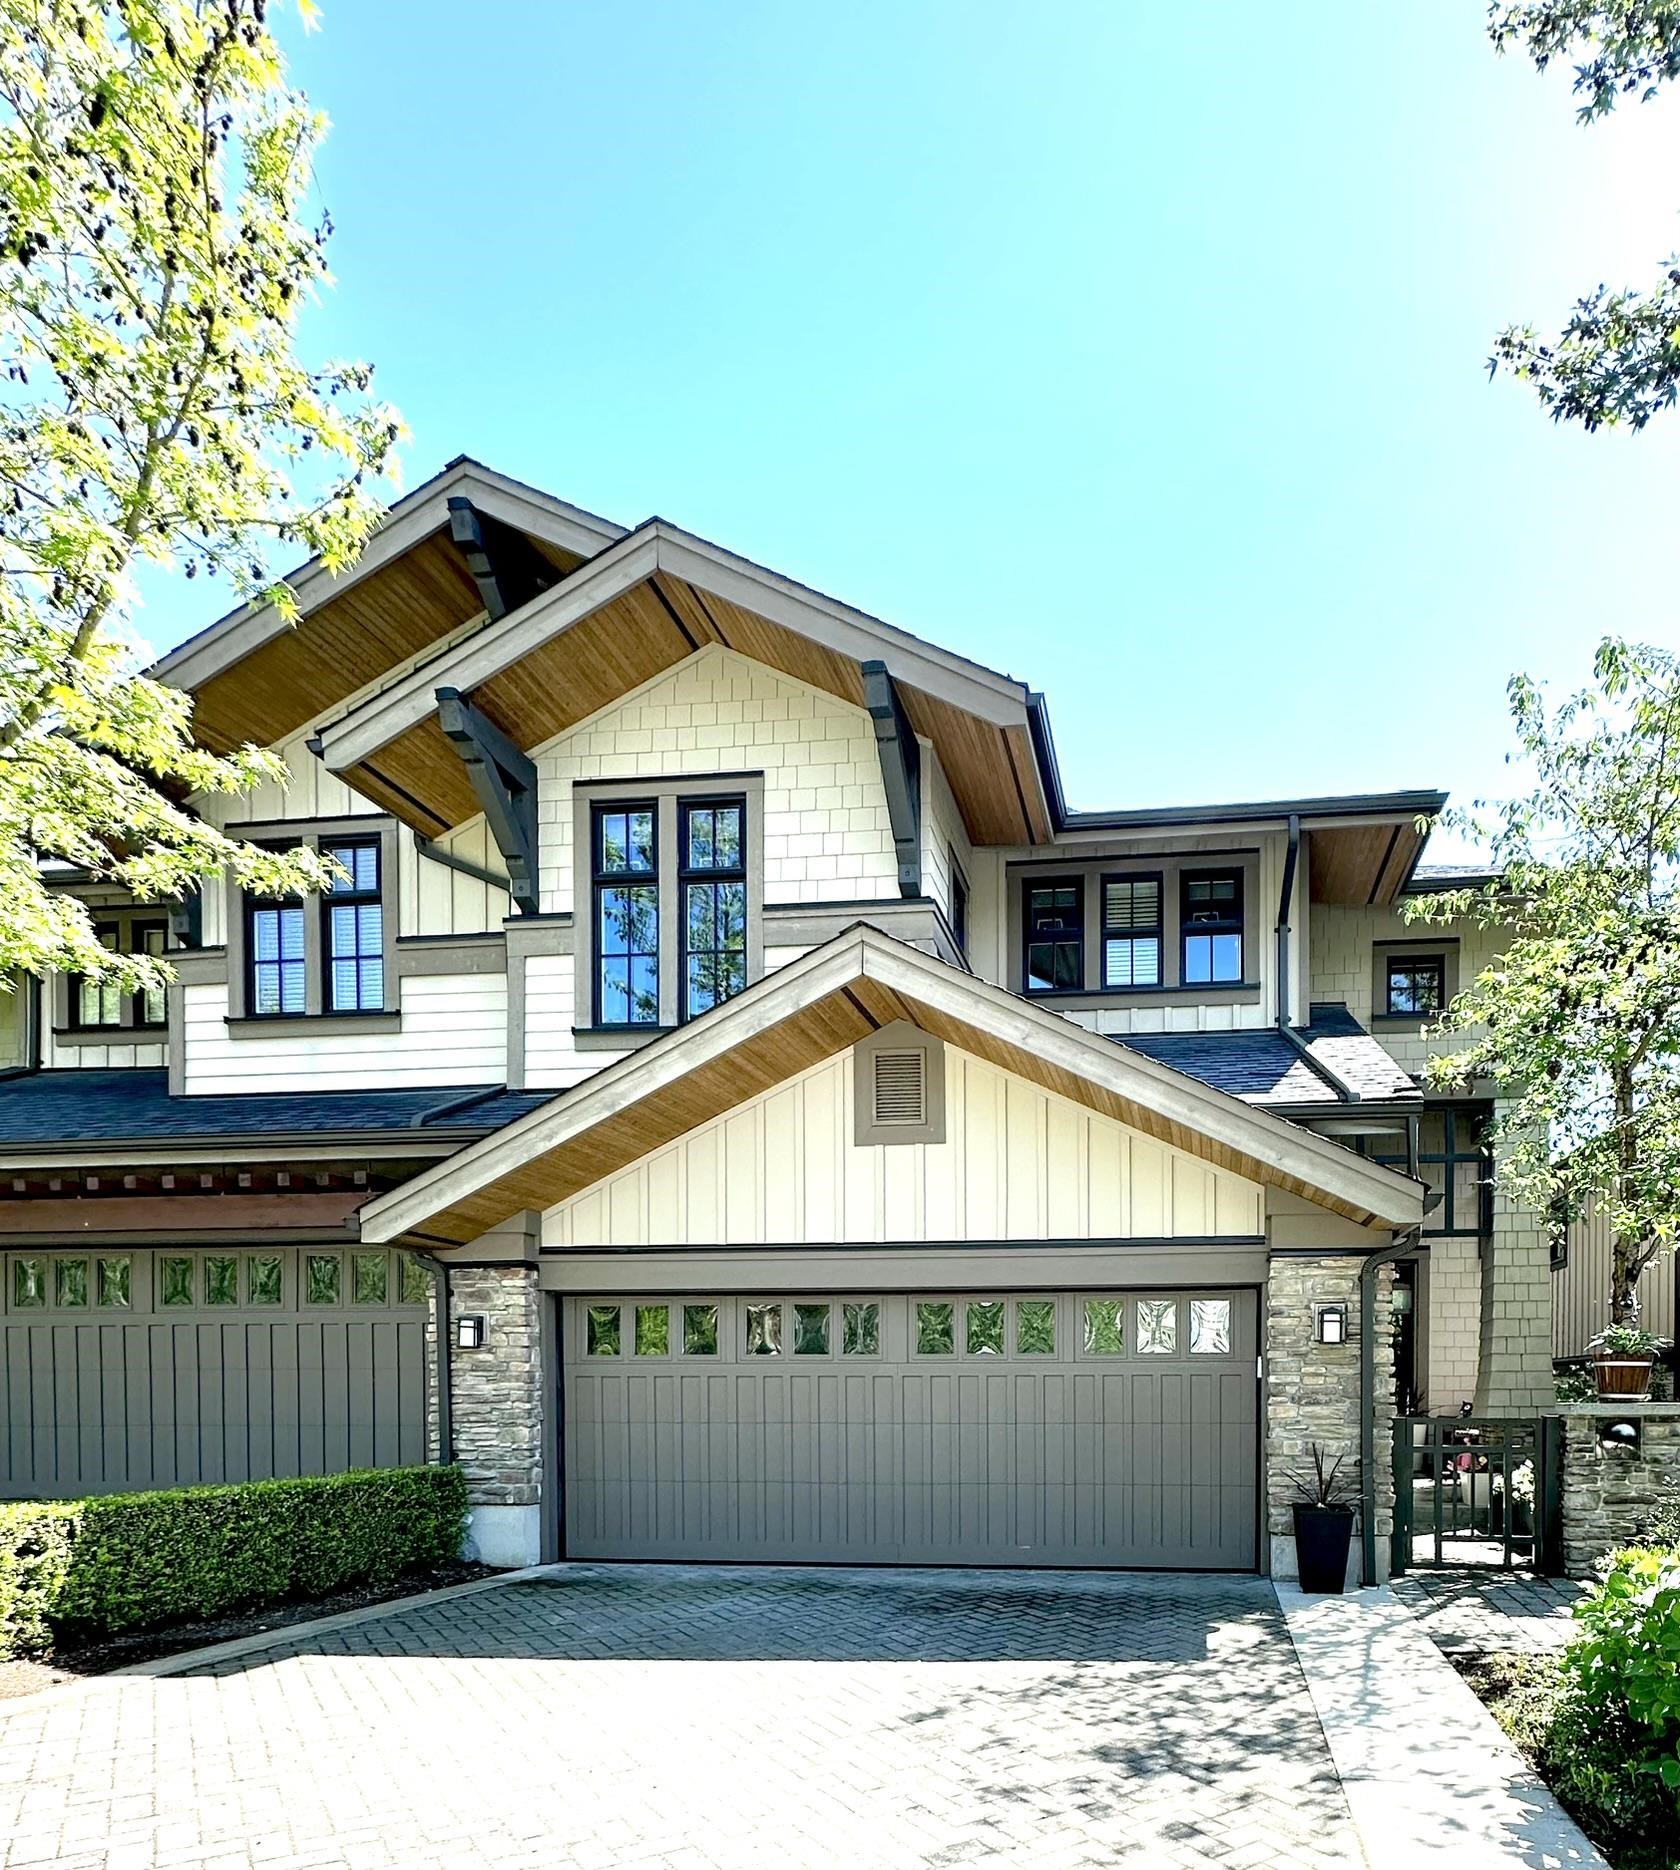 Listing image of 6 555 RAVEN WOODS DRIVE